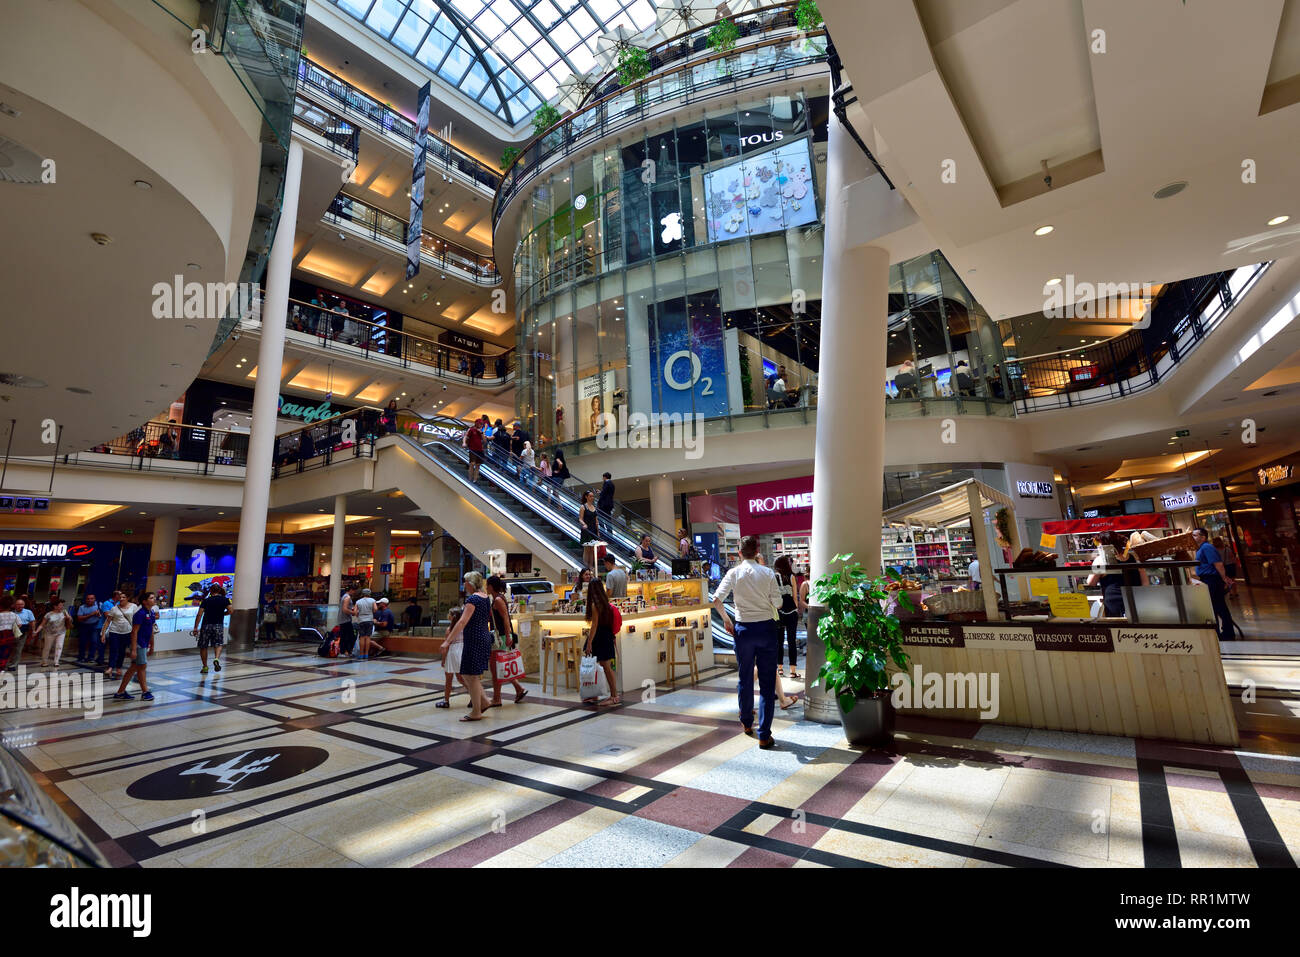 Palladium Shopping Mall High Resolution Stock Photography and Images - Alamy